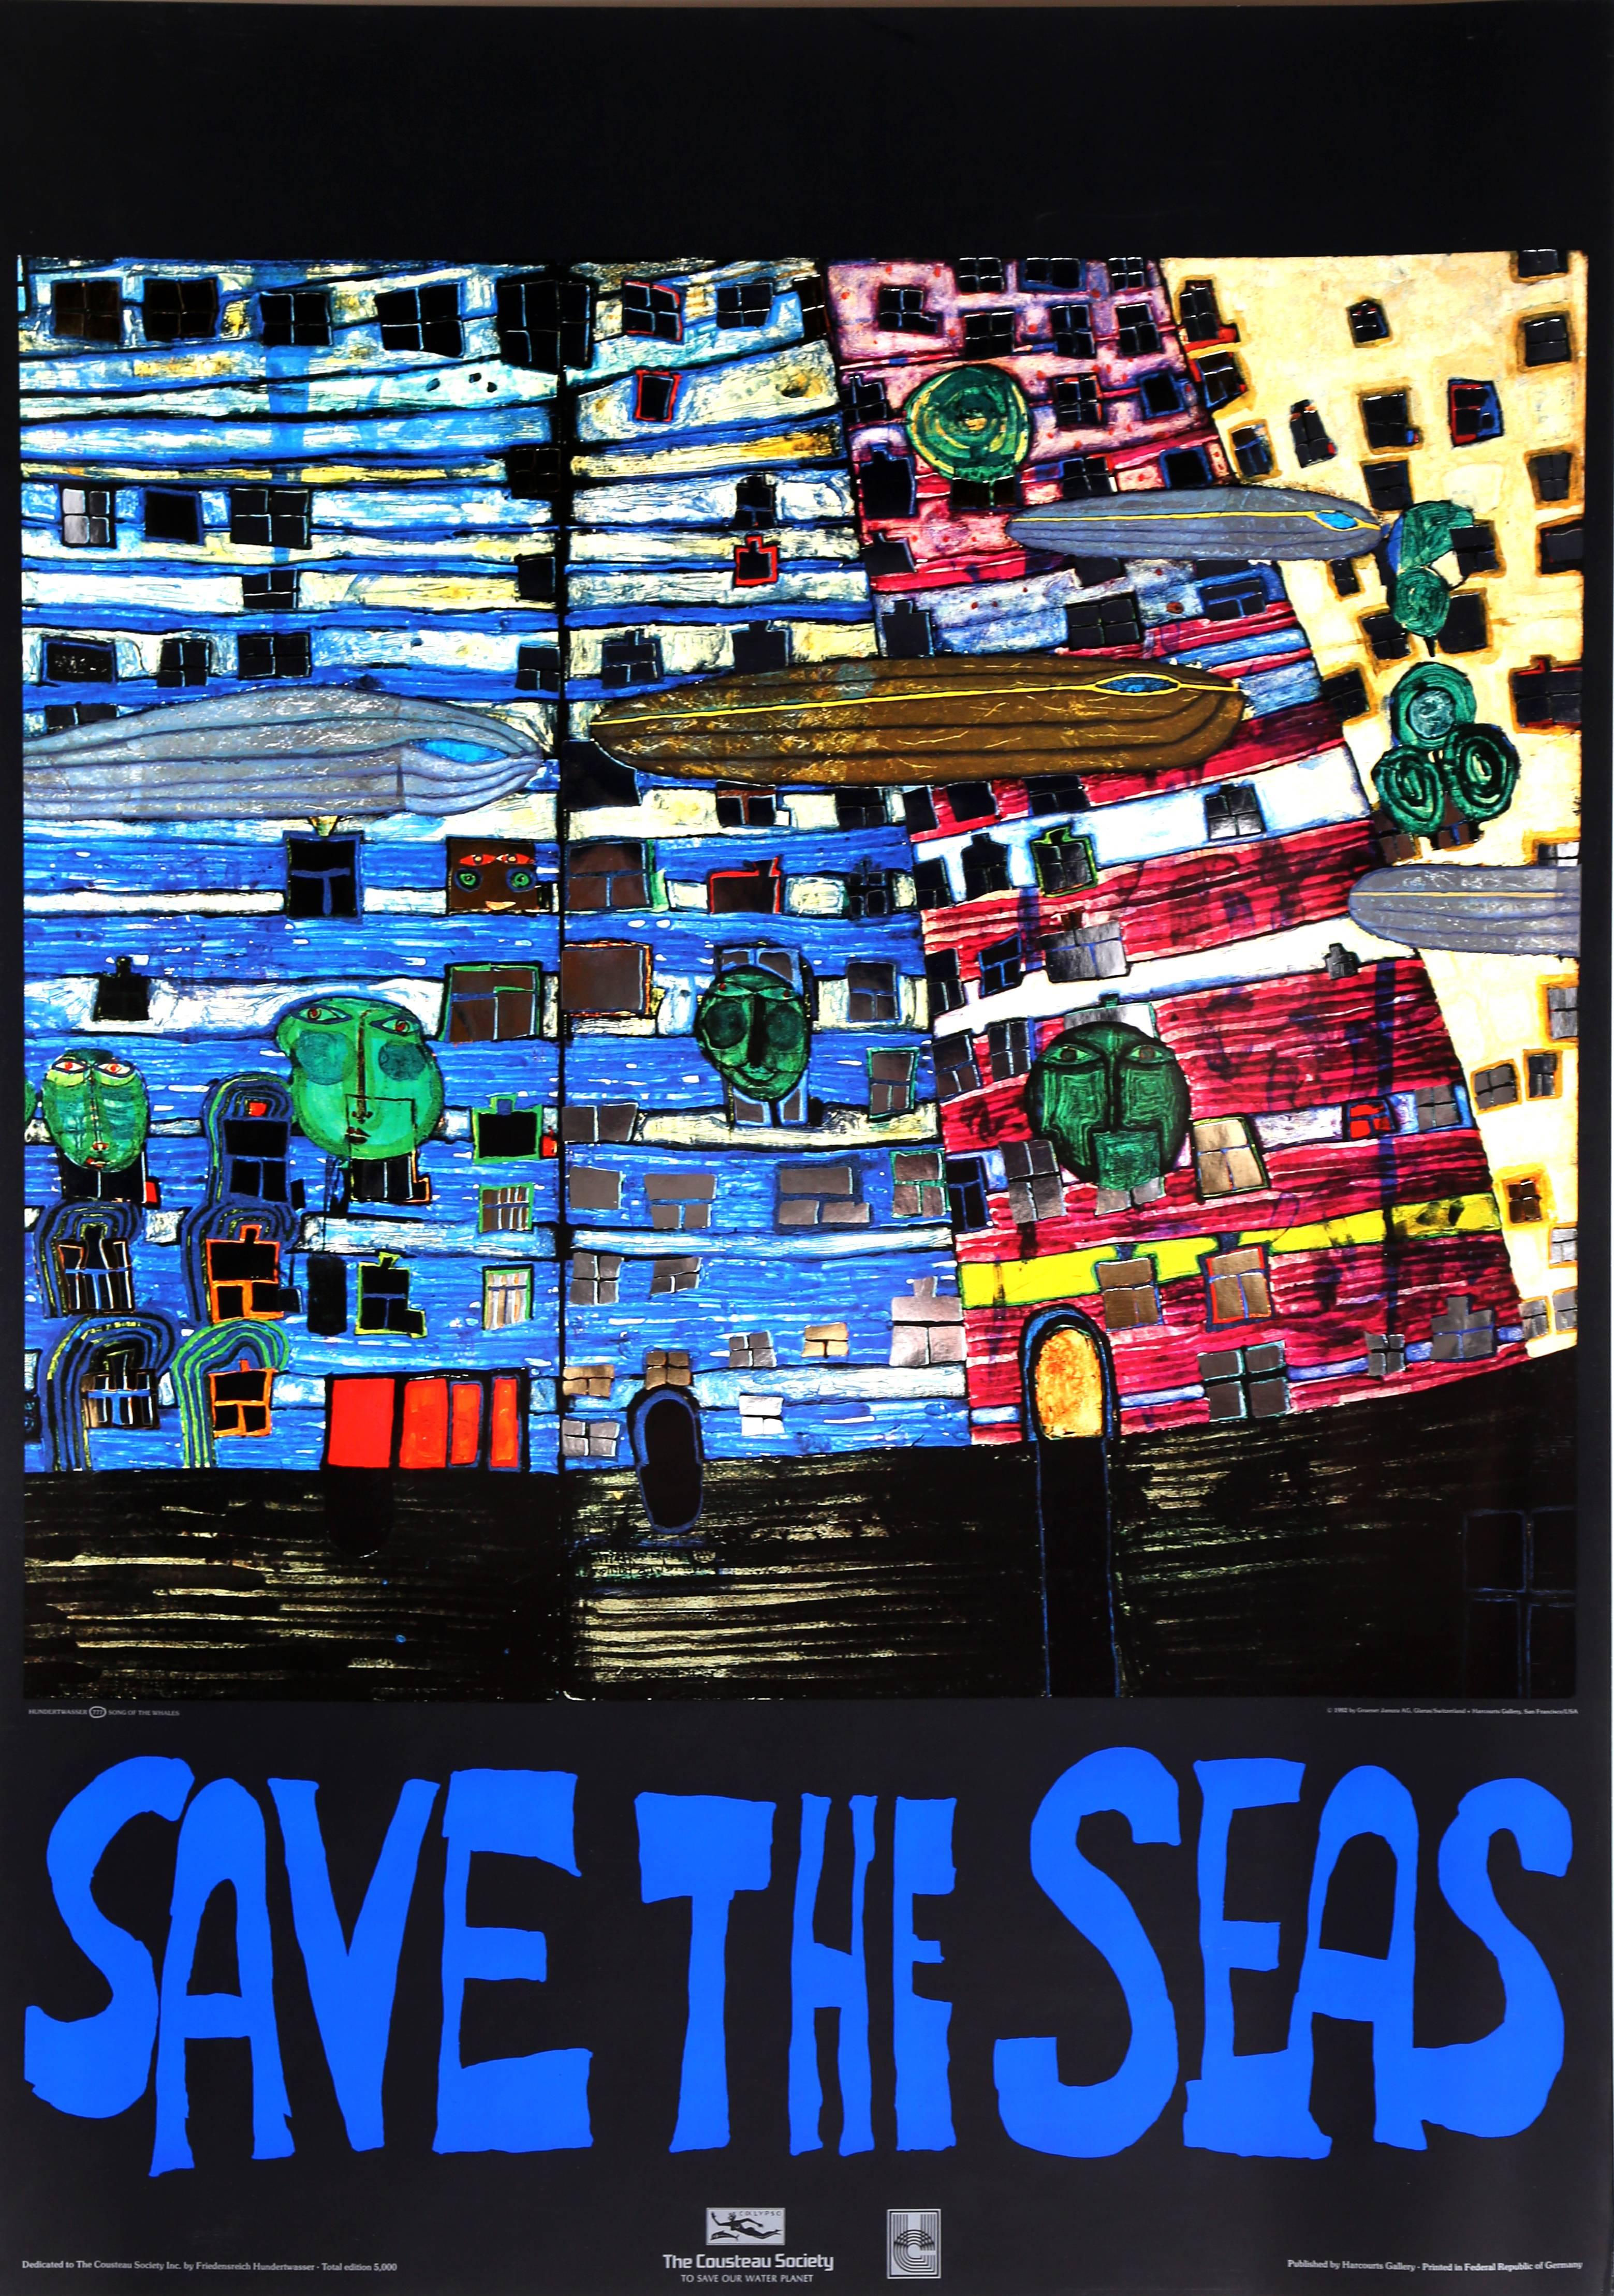 Save the Seas, Foil Embossed Poster, by Hundertwasser 1982